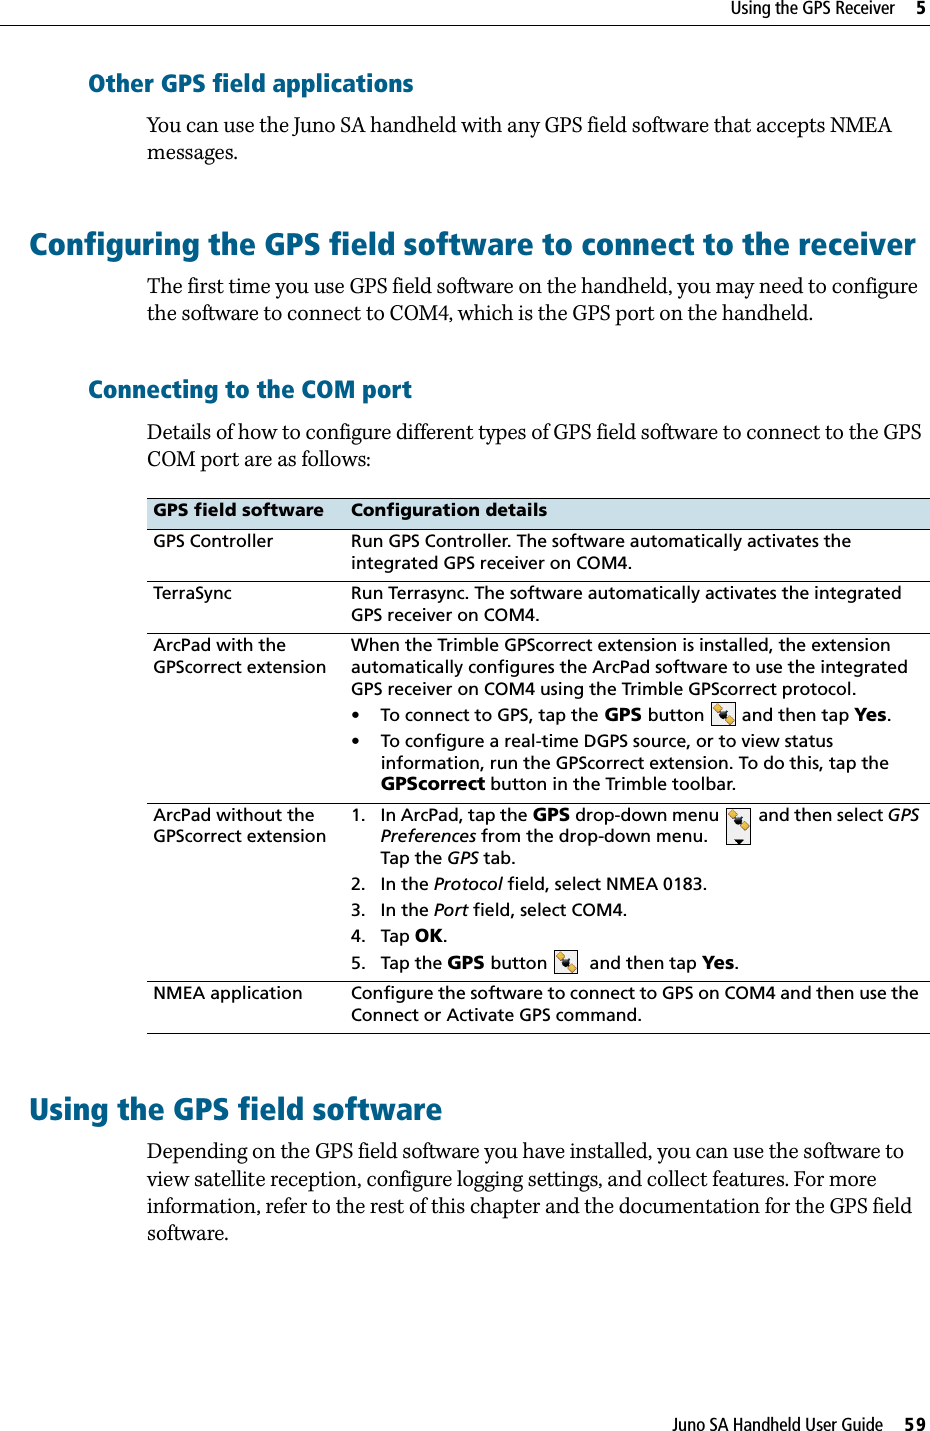 Juno SA Handheld User Guide     59Using the GPS Receiver     5Other GPS field applicationsYou can use the Juno SA handheld with any GPS field software that accepts NMEA messages.Configuring the GPS field software to connect to the receiverThe first time you use GPS field software on the handheld, you may need to configure the software to connect to COM4, which is the GPS port on the handheld.Connecting to the COM portDetails of how to configure different types of GPS field software to connect to the GPS COM port are as follows: Using the GPS field softwareDepending on the GPS field software you have installed, you can use the software to view satellite reception, configure logging settings, and collect features. For more information, refer to the rest of this chapter and the documentation for the GPS field software.GPS field software Configuration detailsGPS Controller Run GPS Controller. The software automatically activates the integrated GPS receiver on COM4. TerraSync Run Terrasync. The software automatically activates the integrated GPS receiver on COM4.ArcPad with the GPScorrect extensionWhen the Trimble GPScorrect extension is installed, the extension automatically configures the ArcPad software to use the integrated GPS receiver on COM4 using the Trimble GPScorrect protocol. • To connect to GPS, tap the GPS button and then tap Yes.• To configure a real-time DGPS source, or to view status information, run the GPScorrect extension. To do this, tap the GPScorrect button in the Trimble toolbar.ArcPad without the GPScorrect extension1. In ArcPad, tap the GPS drop-down menu   and then select GPS Preferences from the drop-down menu. Tap the GPS tab.2. In the Protocol field, select NMEA 0183.3. In the Port field, select COM4.4. Tap OK.5. Tap the GPS button   and then tap Yes. NMEA application Configure the software to connect to GPS on COM4 and then use the Connect or Activate GPS command.